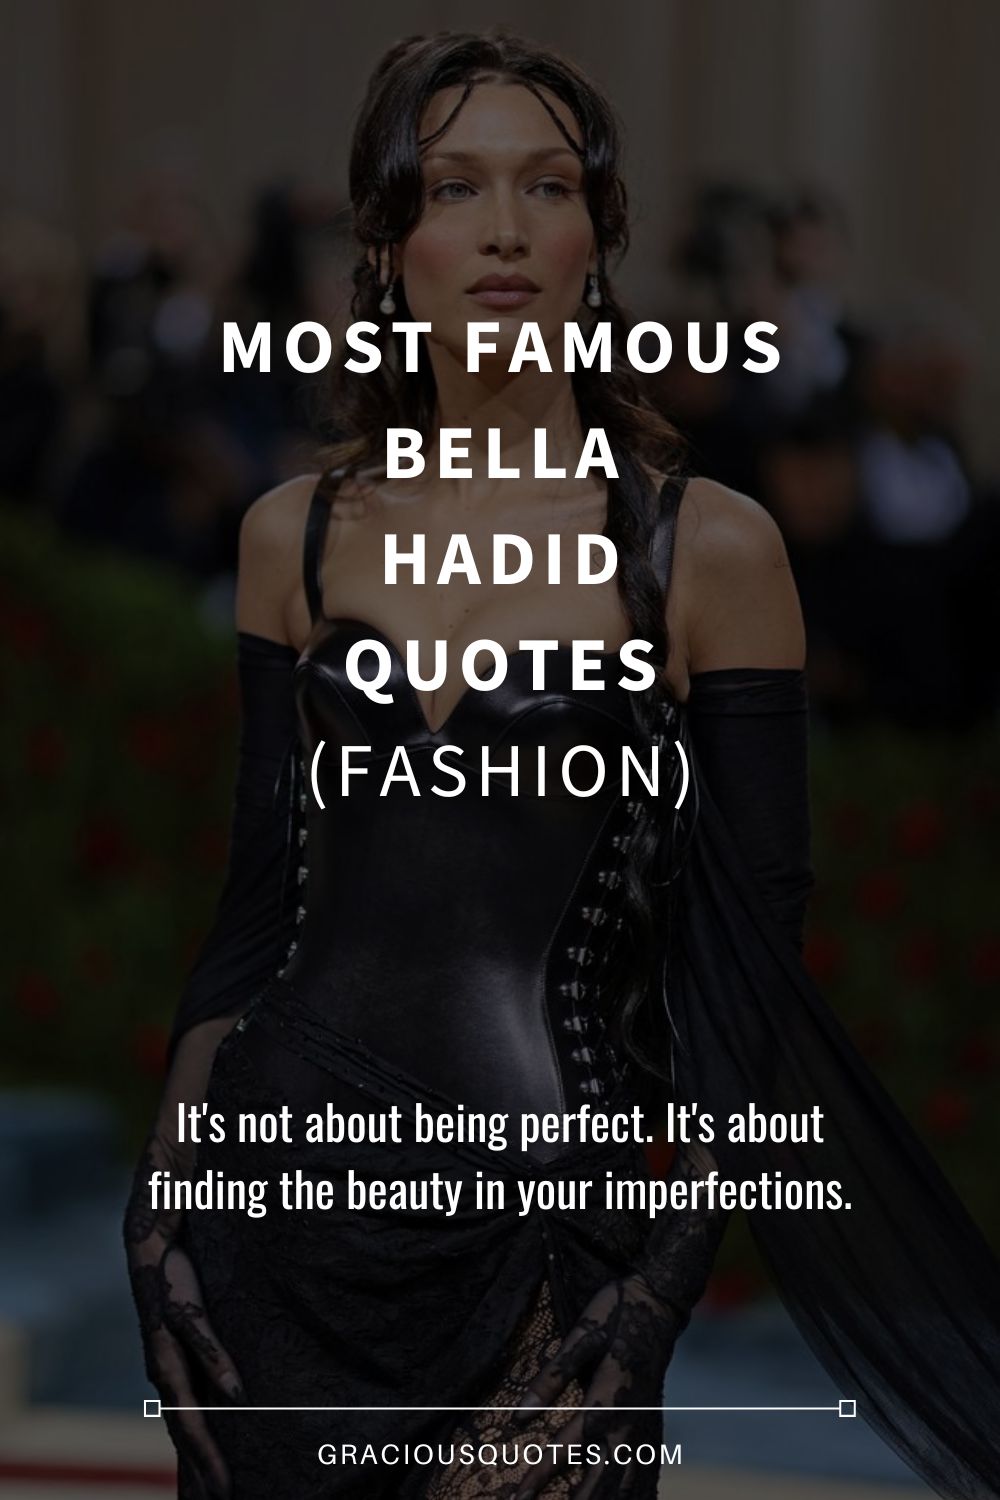 Most Famous Bella Hadid Quotes (FASHION) - Gracious Quotes